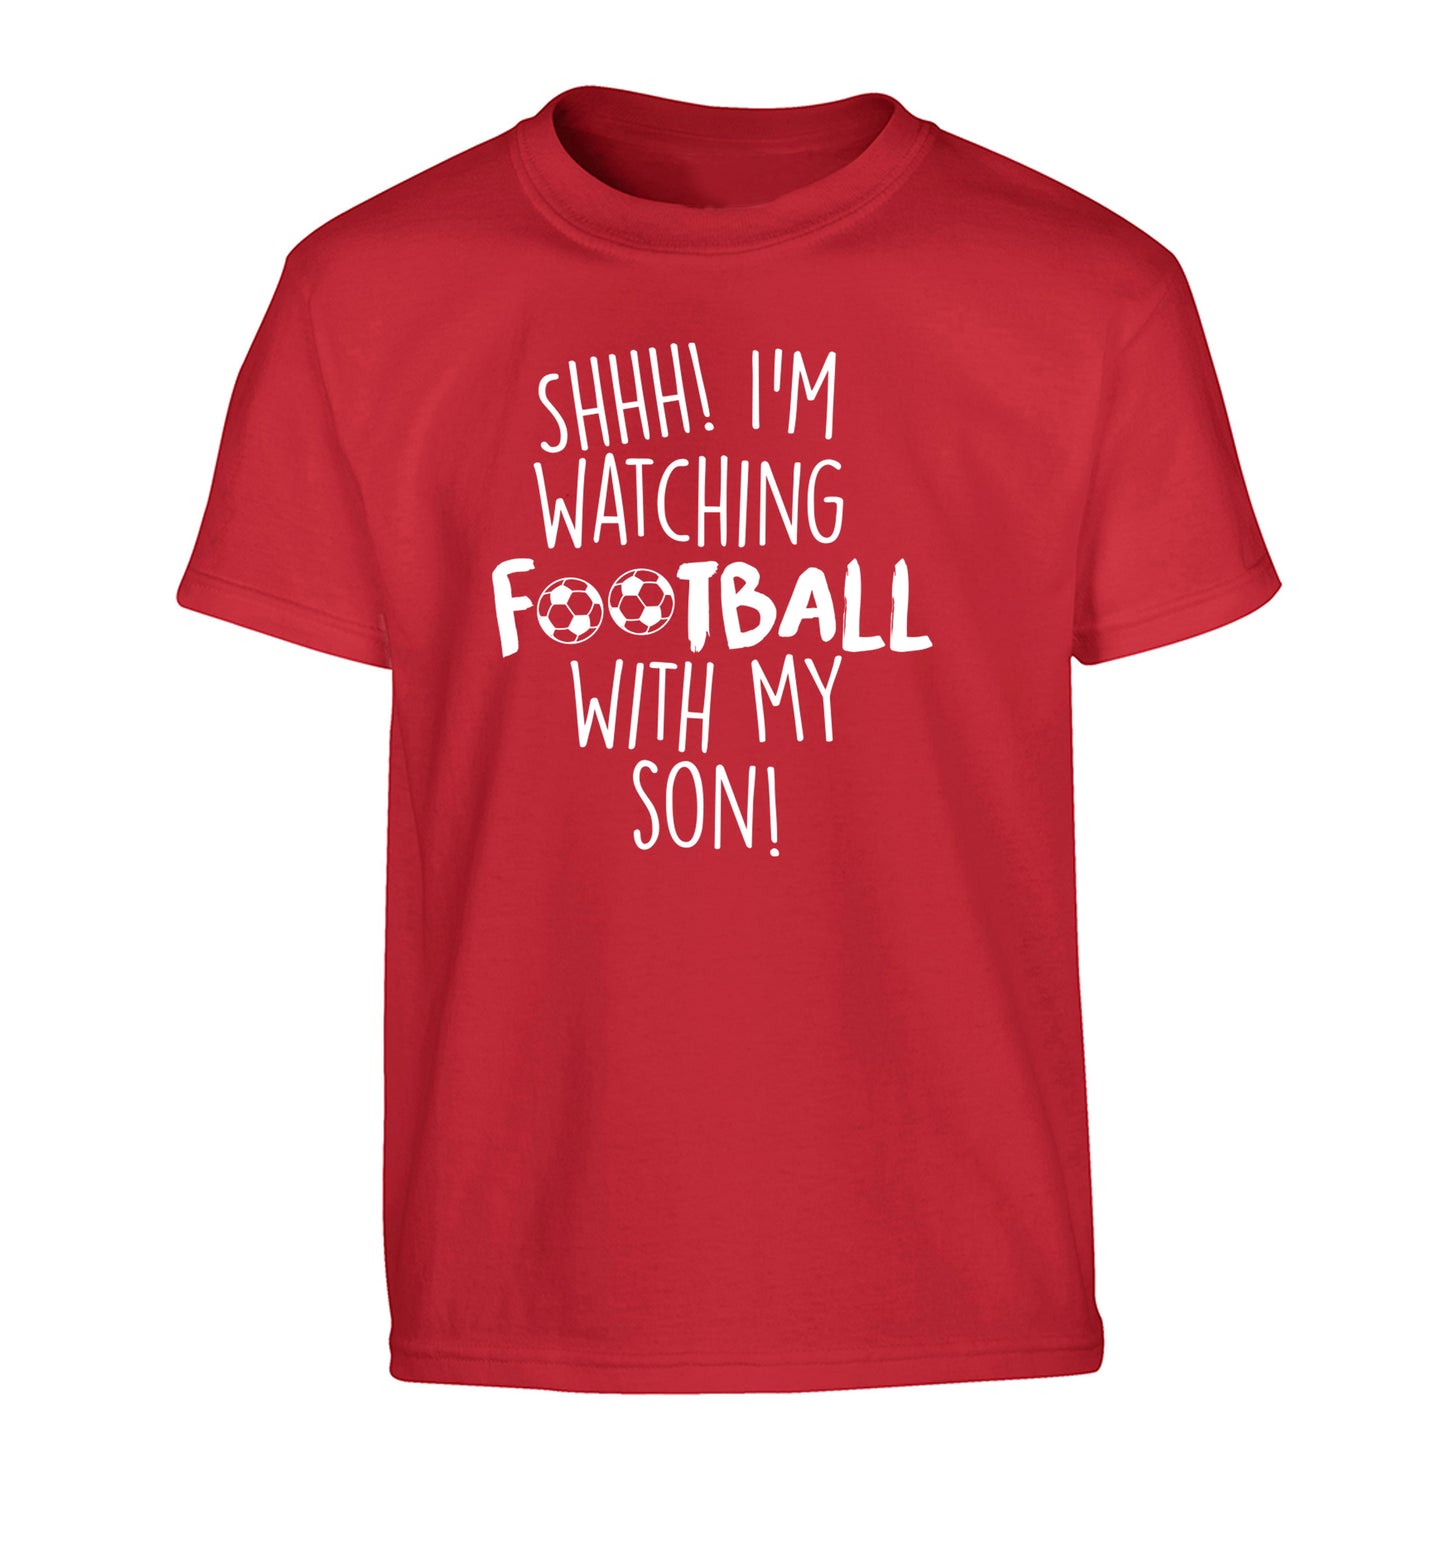 Shhh I'm watching football with my son Children's red Tshirt 12-14 Years